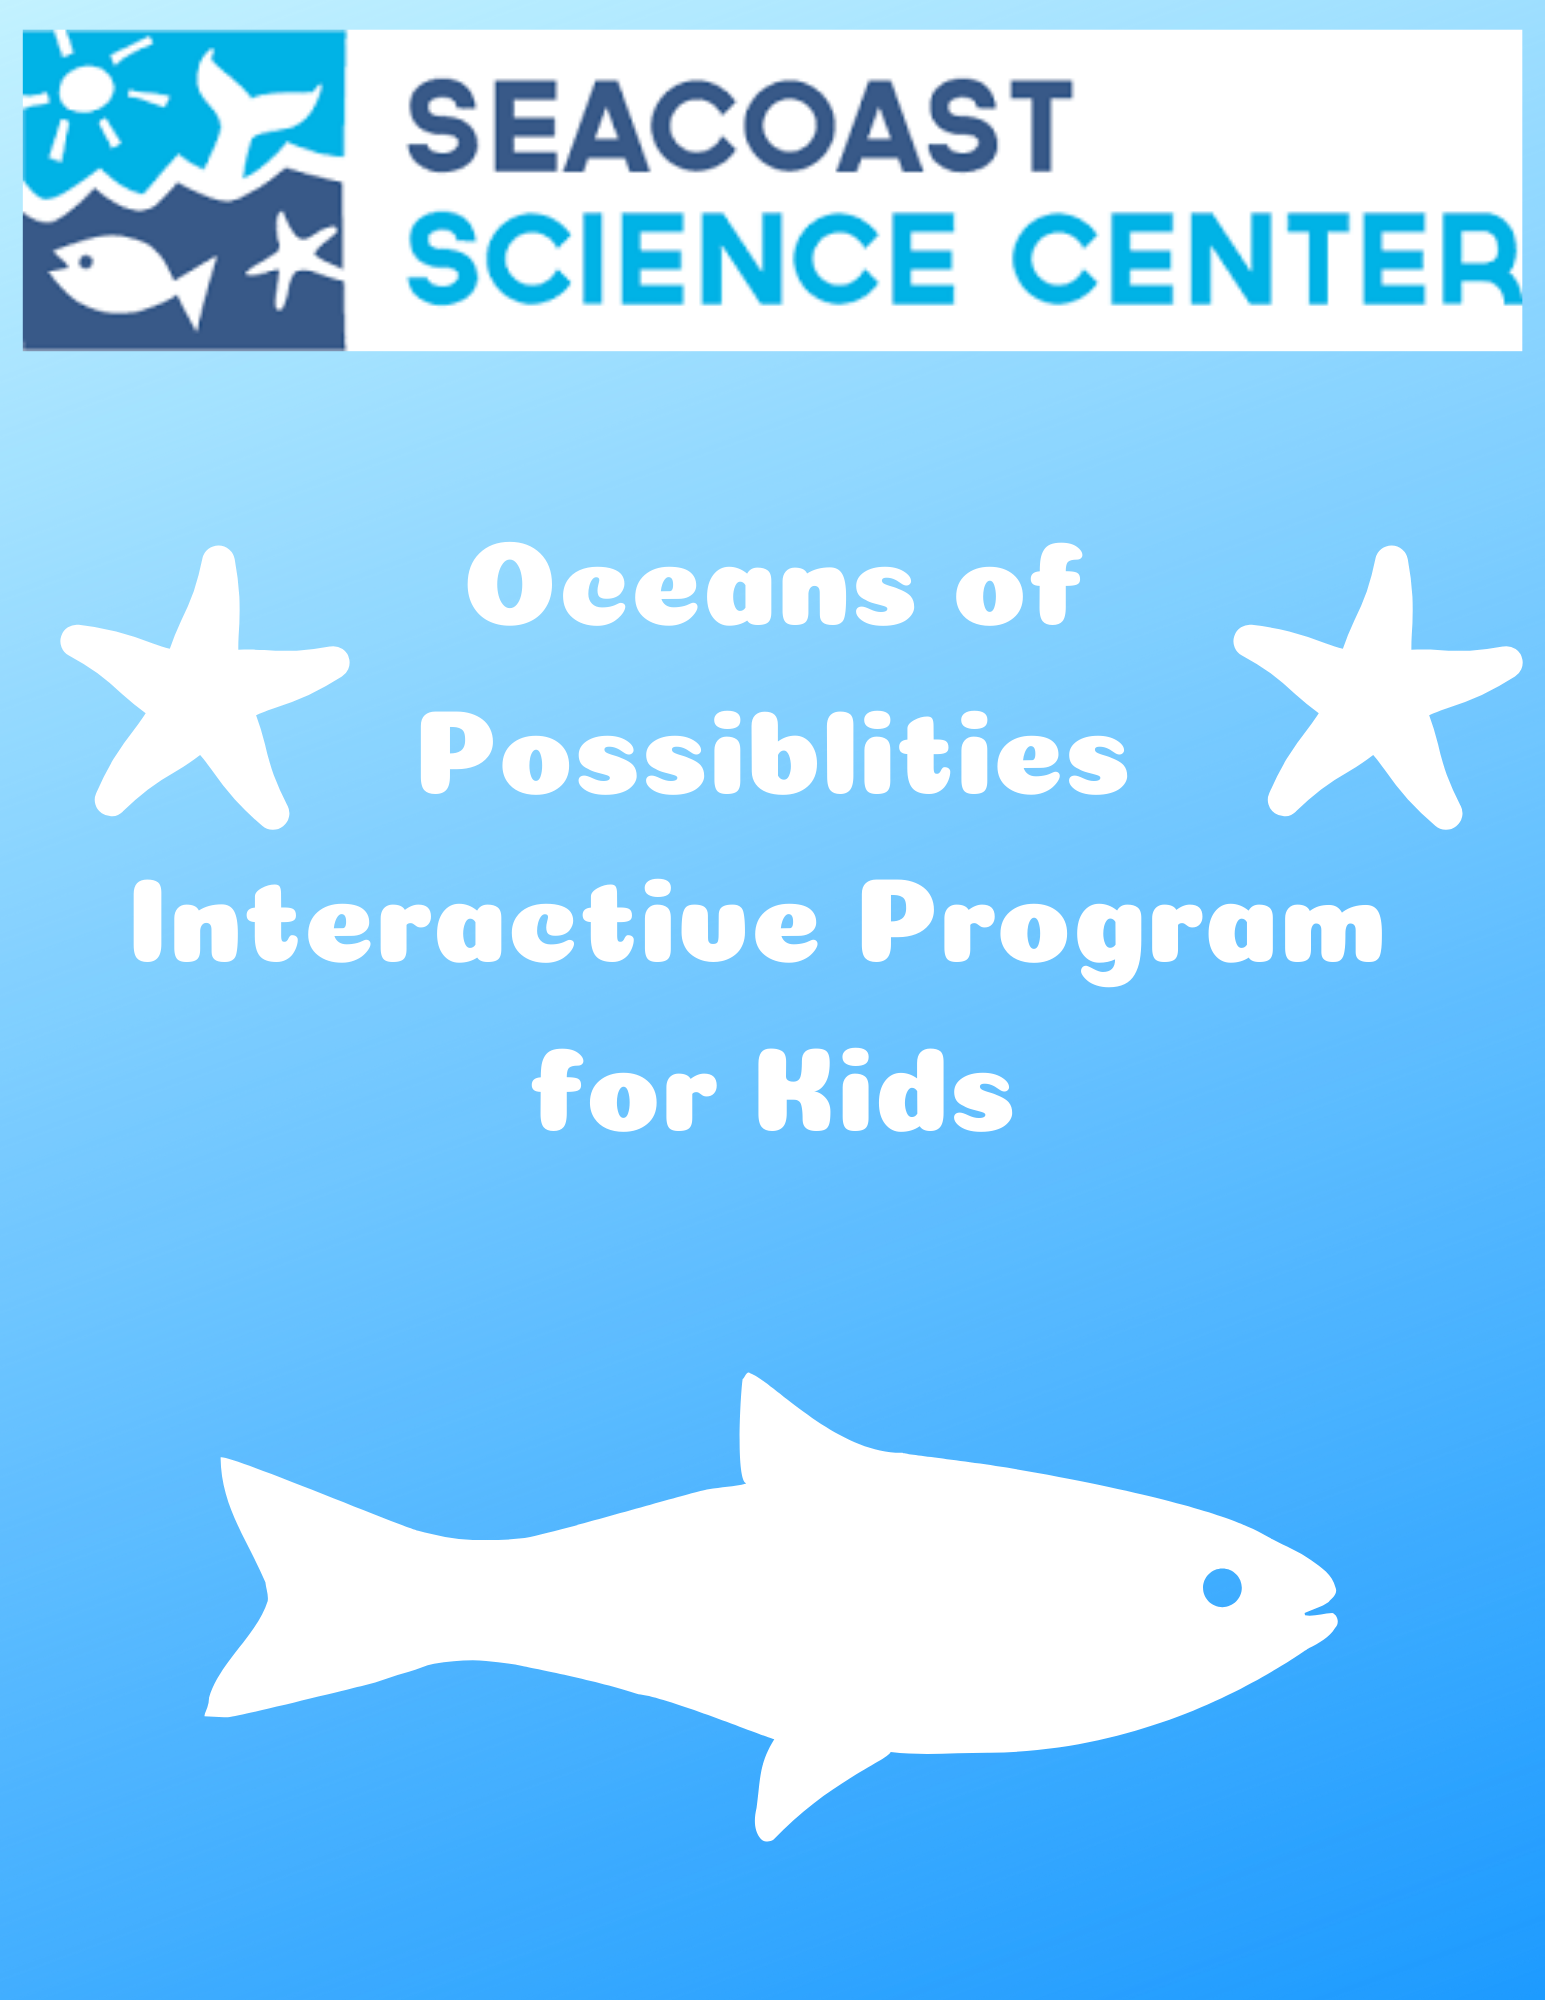 Oceans of Possibilities with Seacoast Science Center